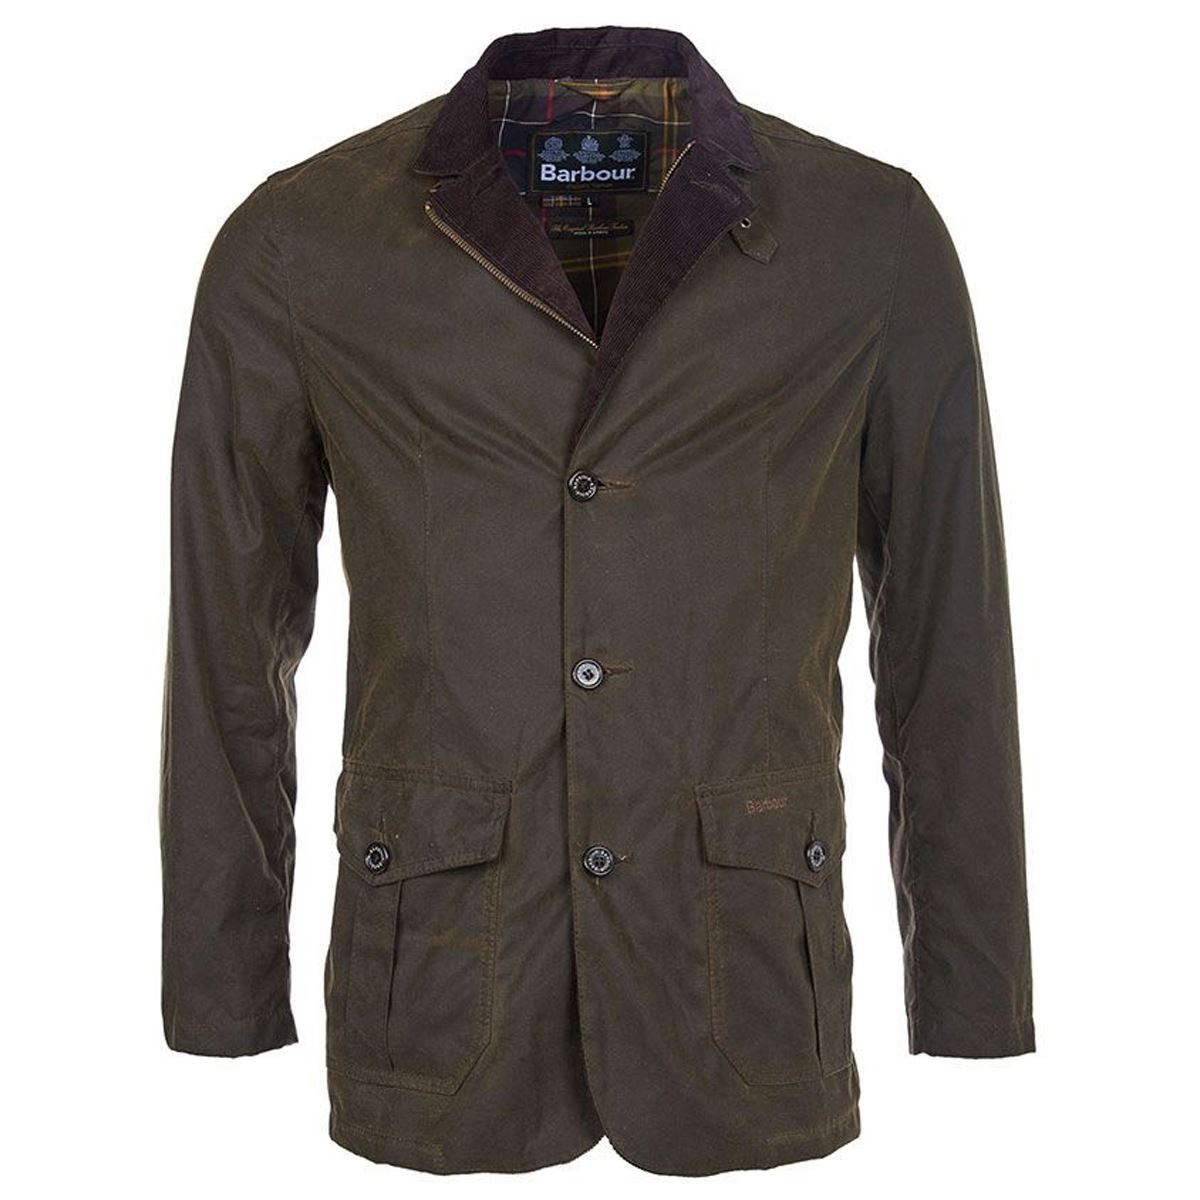 Barbour Mens Lutz Wax Jacket Questions & Answers